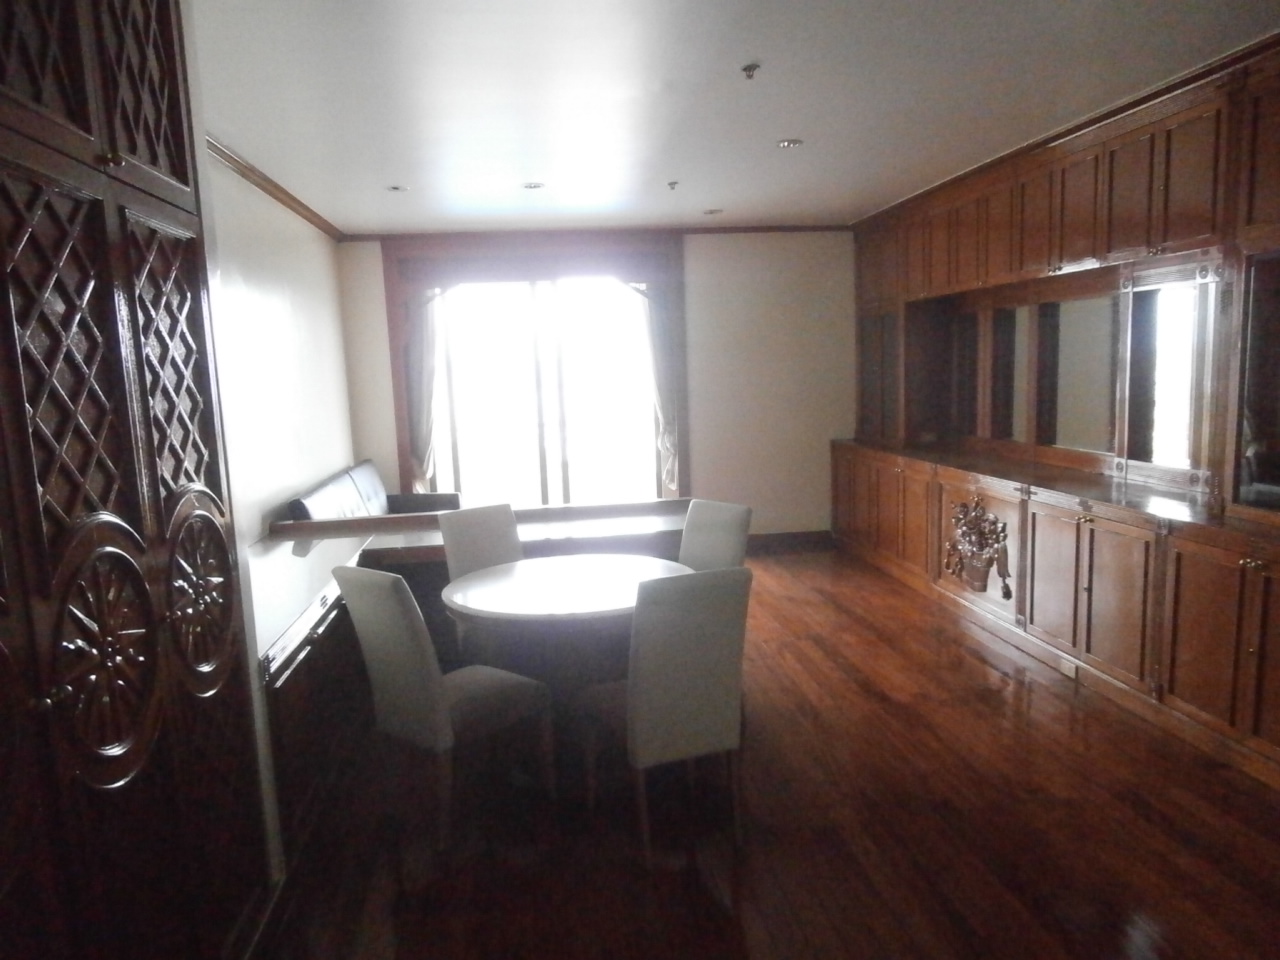 Condo for rent!! 1 bedroom, 74 sq.m. North East Facing.